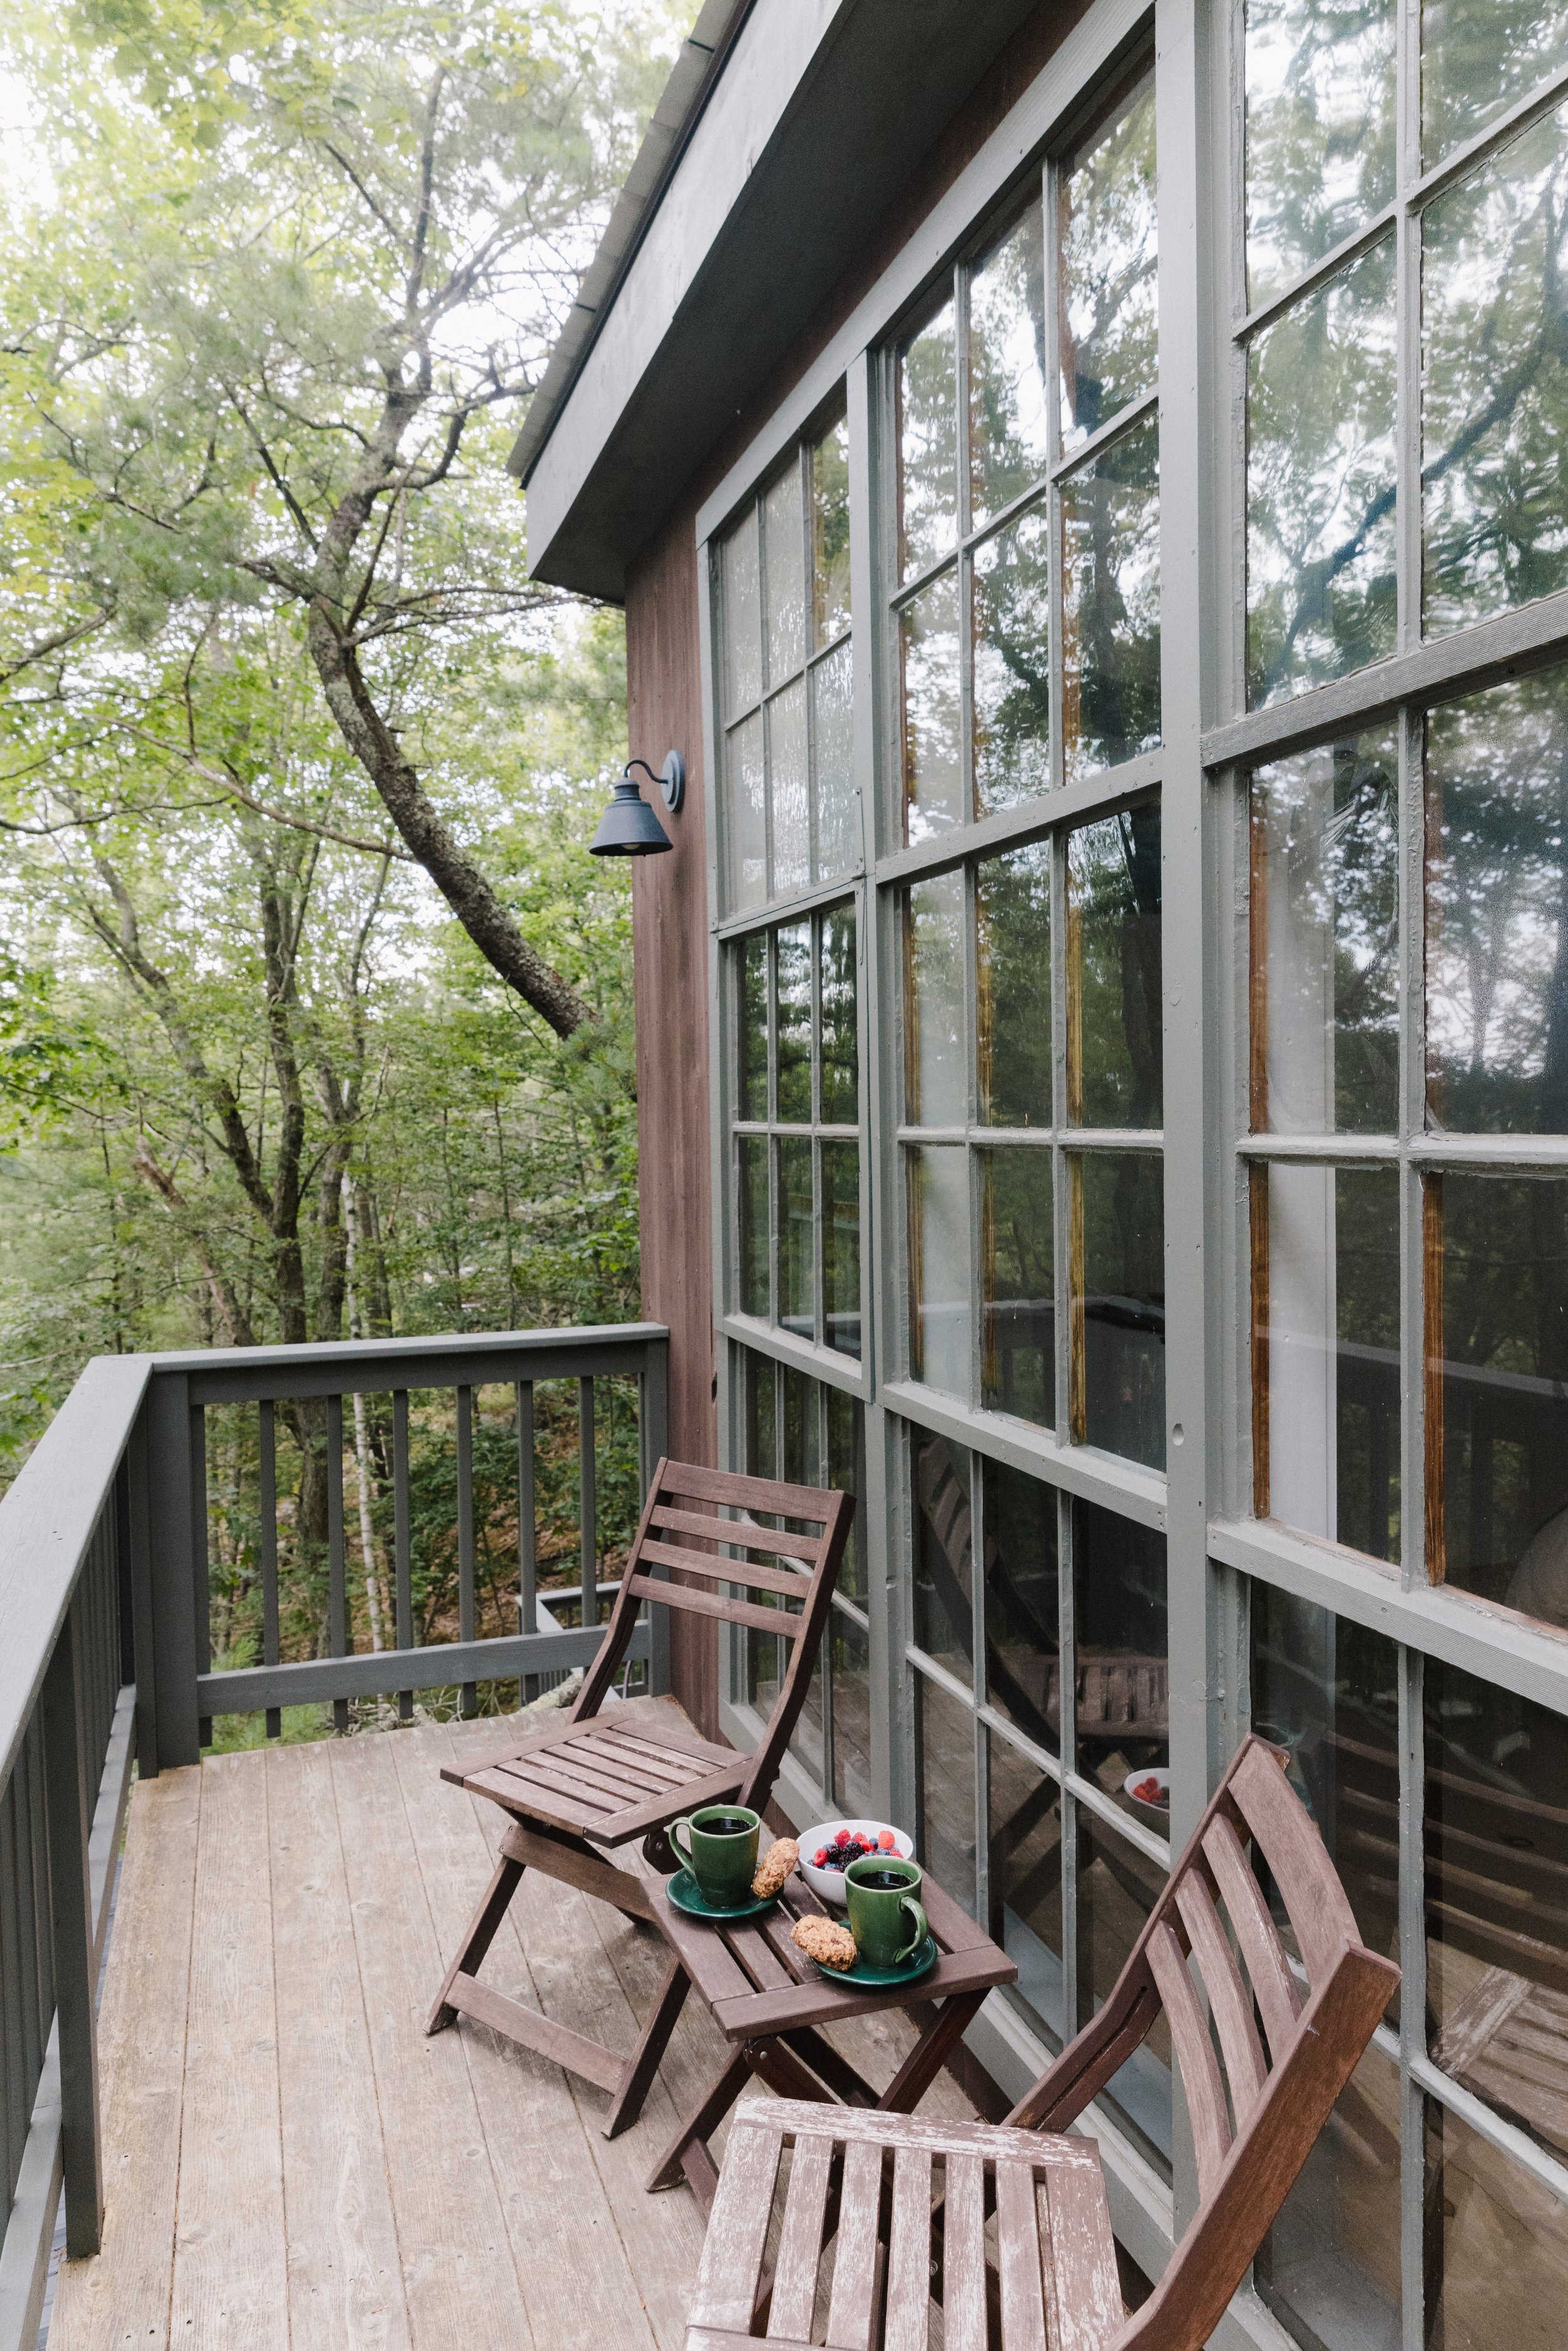 Master Bedroom Treehouse Porch at Seguin Tree Dwellings.